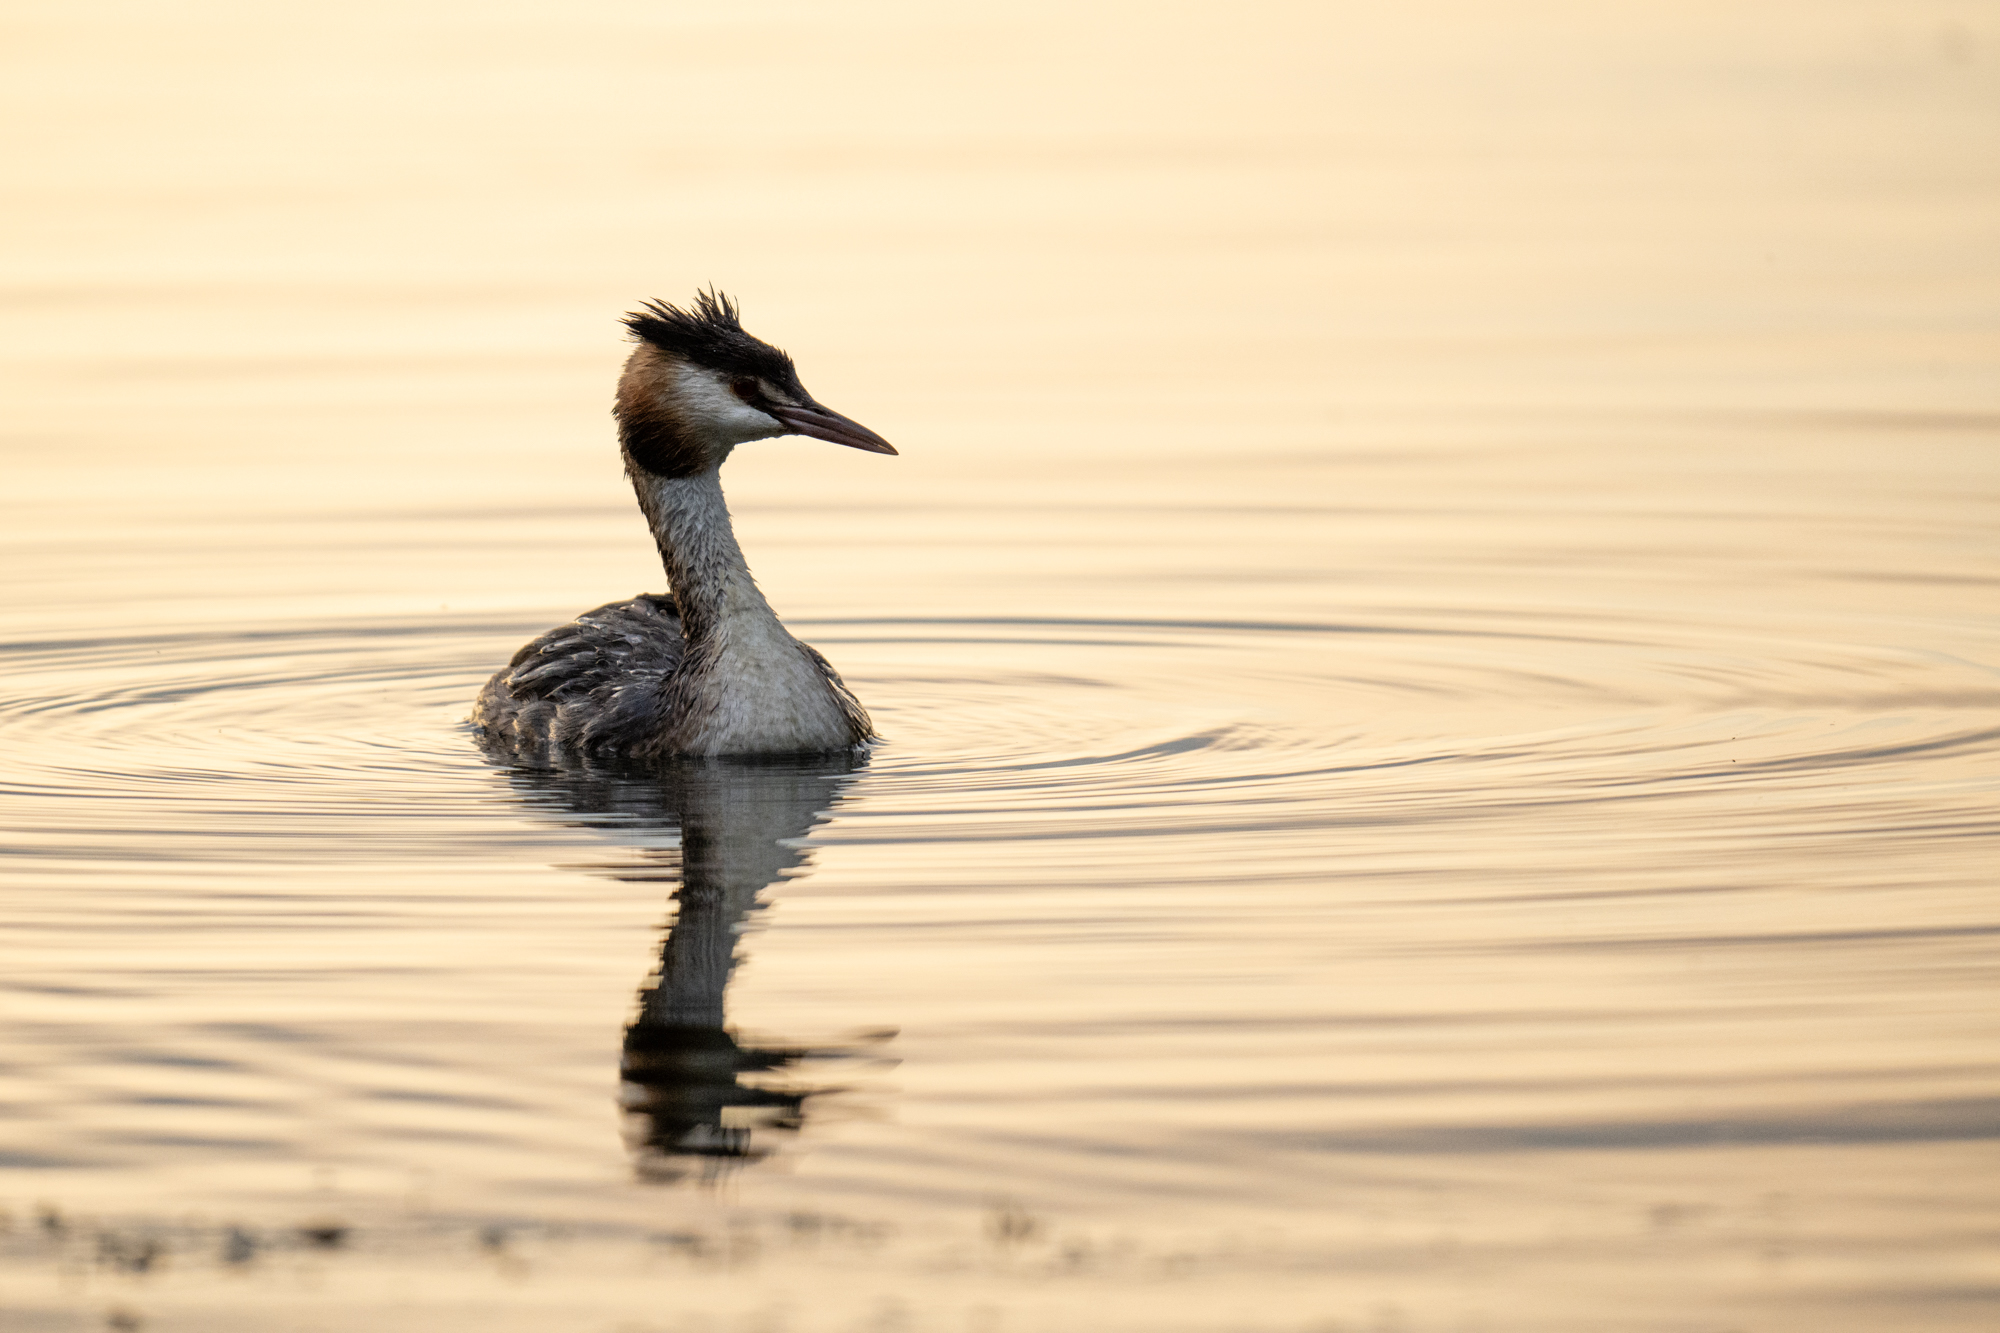 Photo of a grebe taken with the Nikkor Z 180-600mm f/5.6-6.3 VR